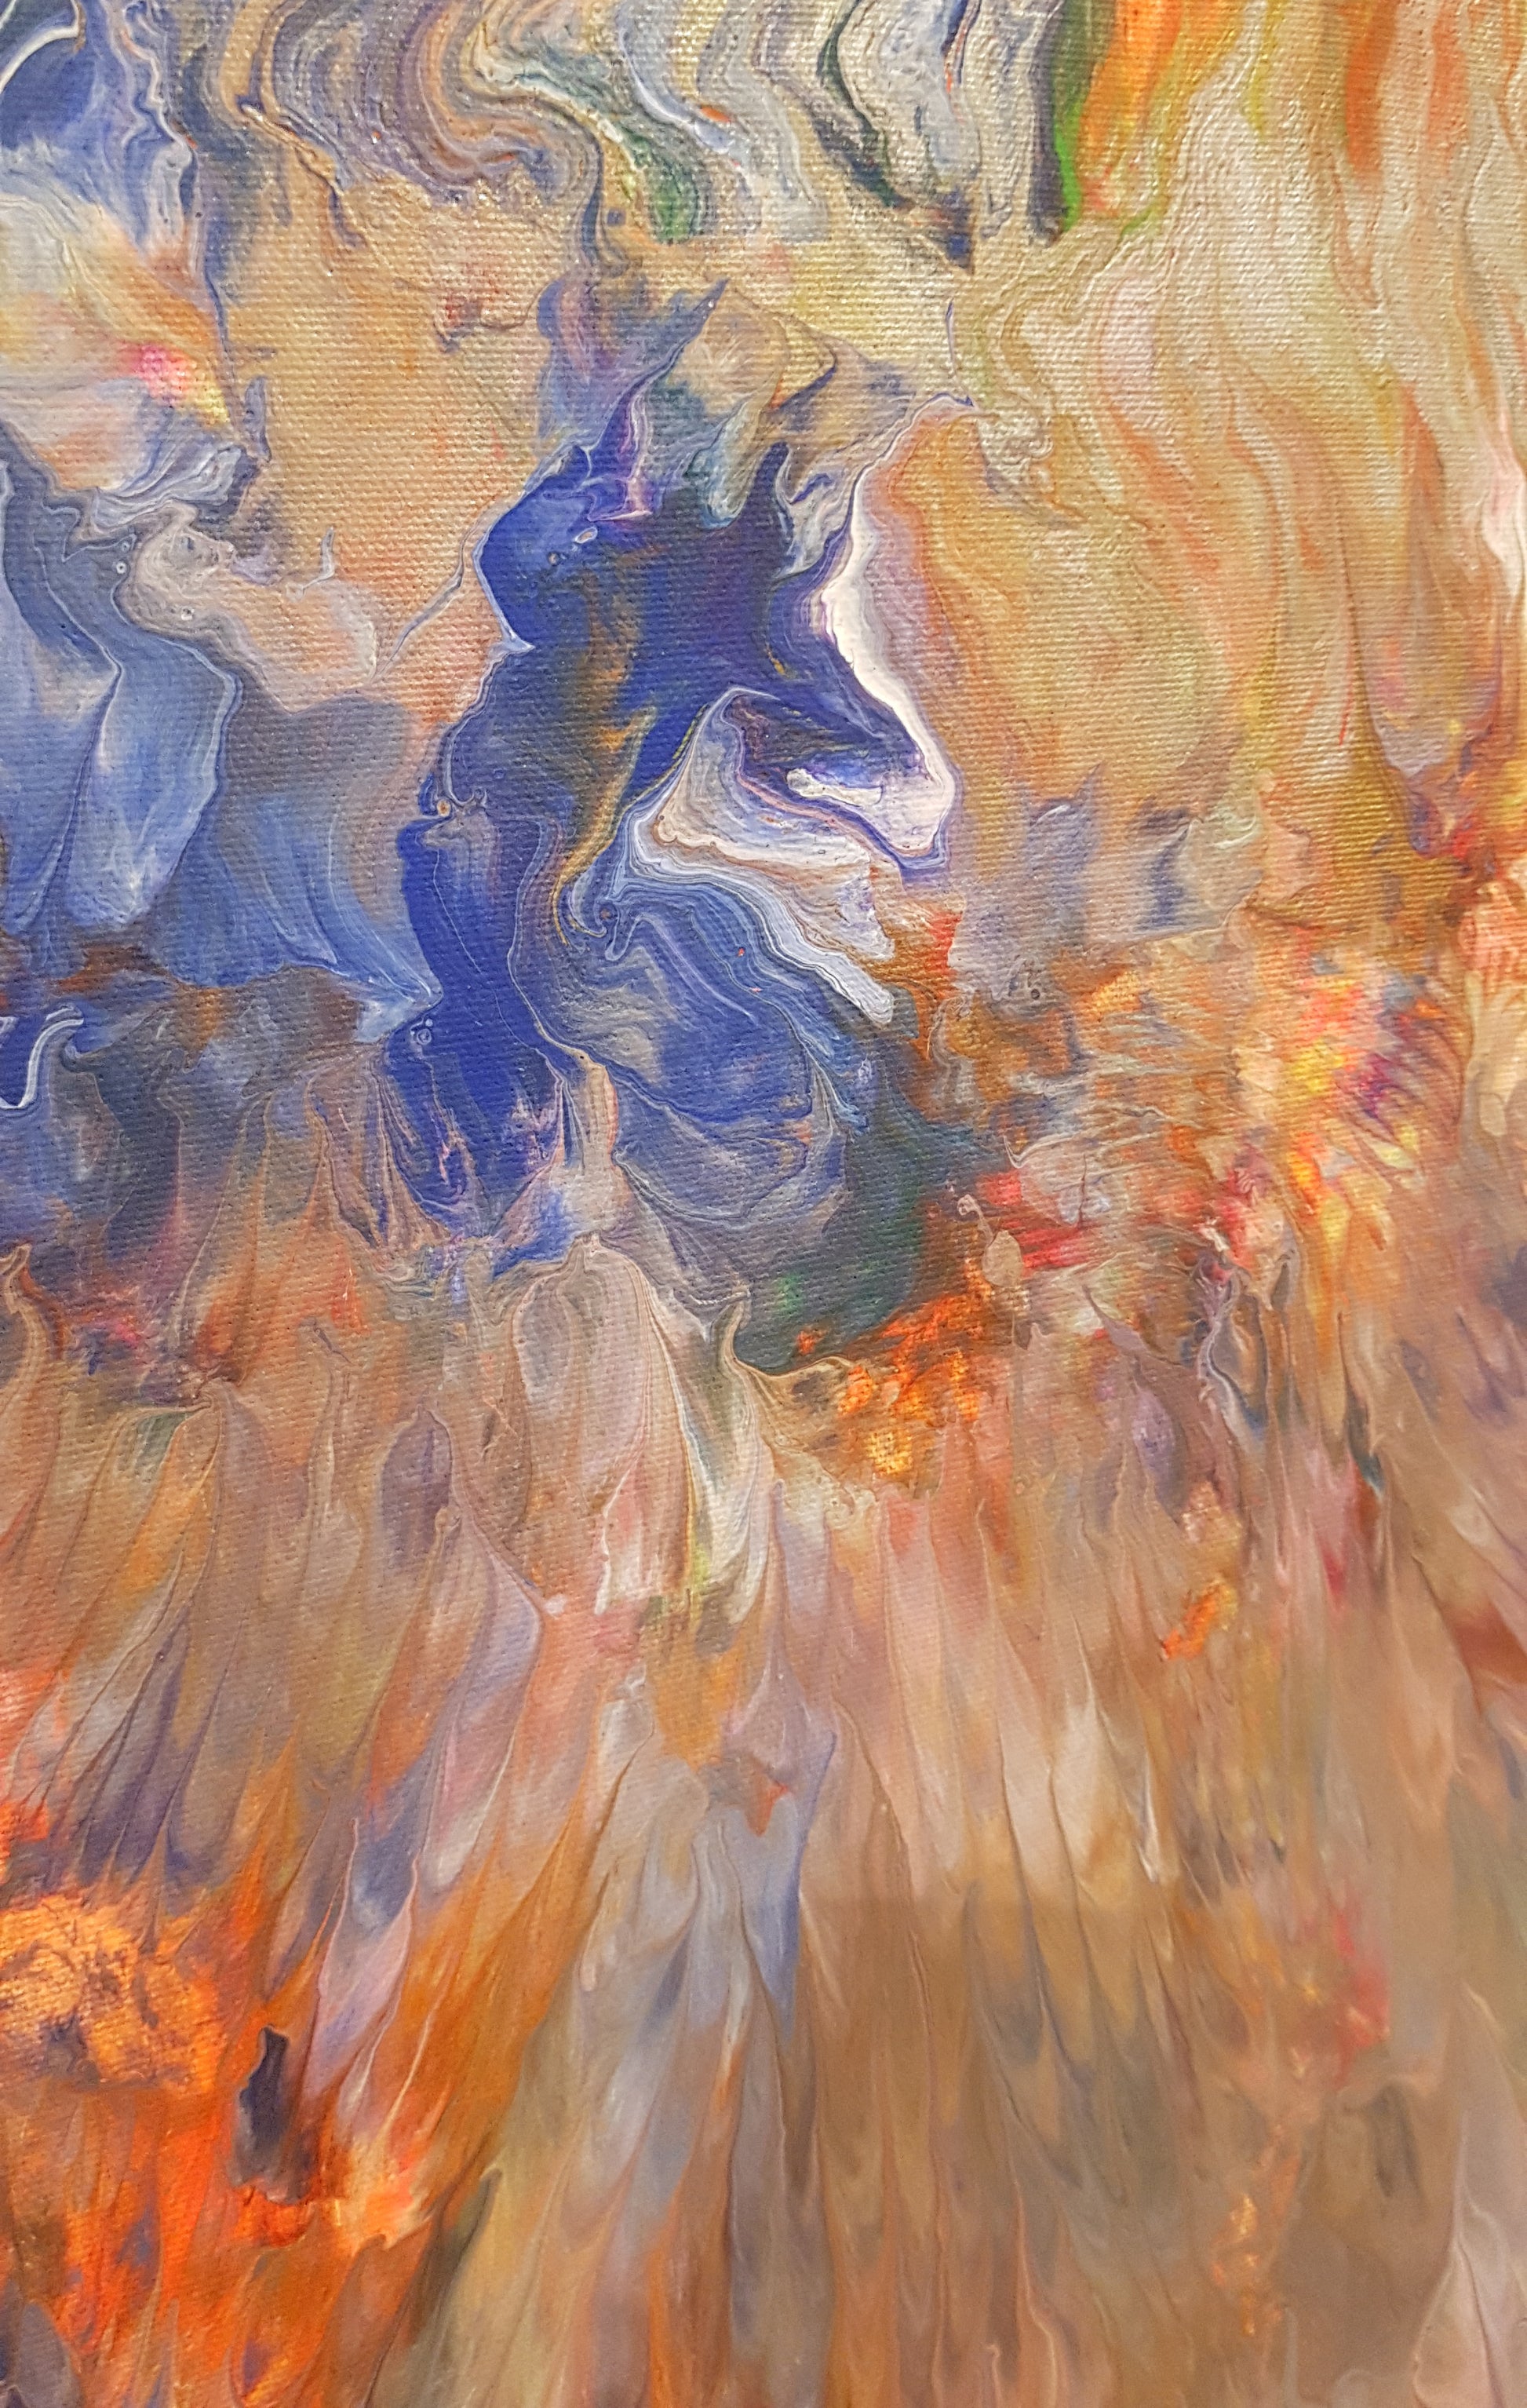 Stallion-Spirit-Alexandra-Romano-Abstract-Expressionism-Contemporary-Art-for-Sale-Online